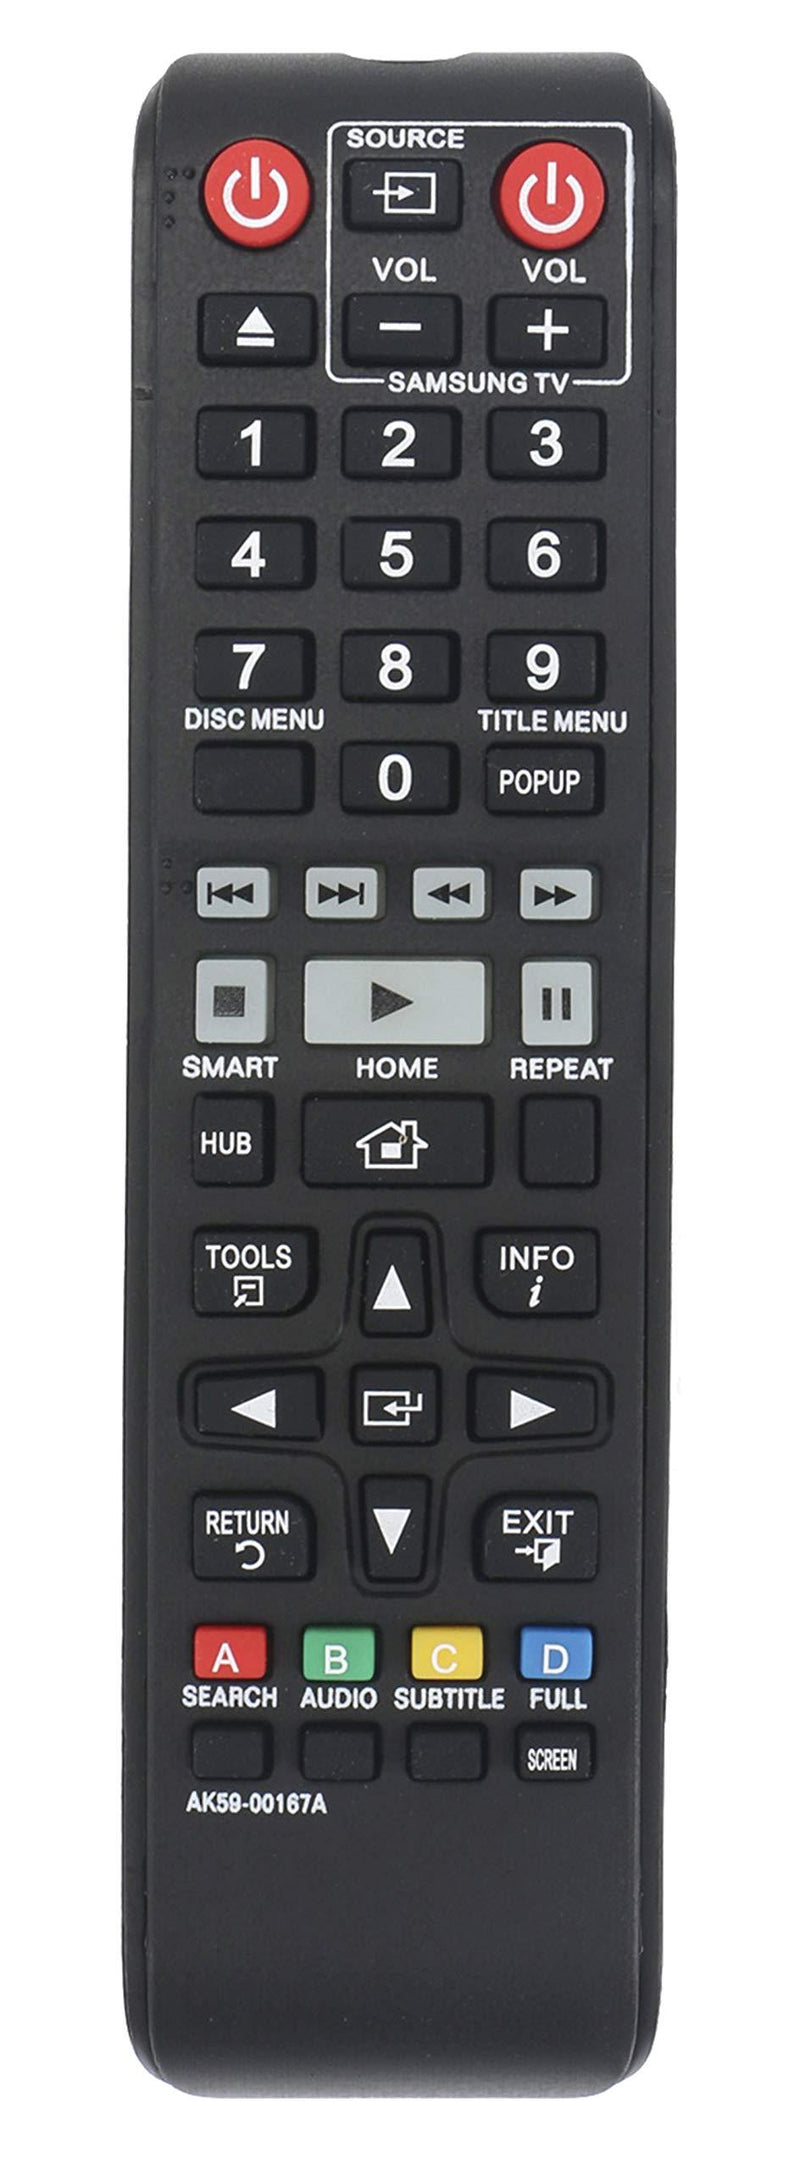 AK59-00167A Replace Remote fit for Samsung Smart 3D Blu-ray DVD Player UBD-K8500 BD-F6500 BD-F7500 BD-JM63 BD-JM63C BD-J6300 BD-J6300/ZA BD-JM63 BD-JM63C BD-F7500/ZA BD-F6700 BD-J7500 BD-J7500